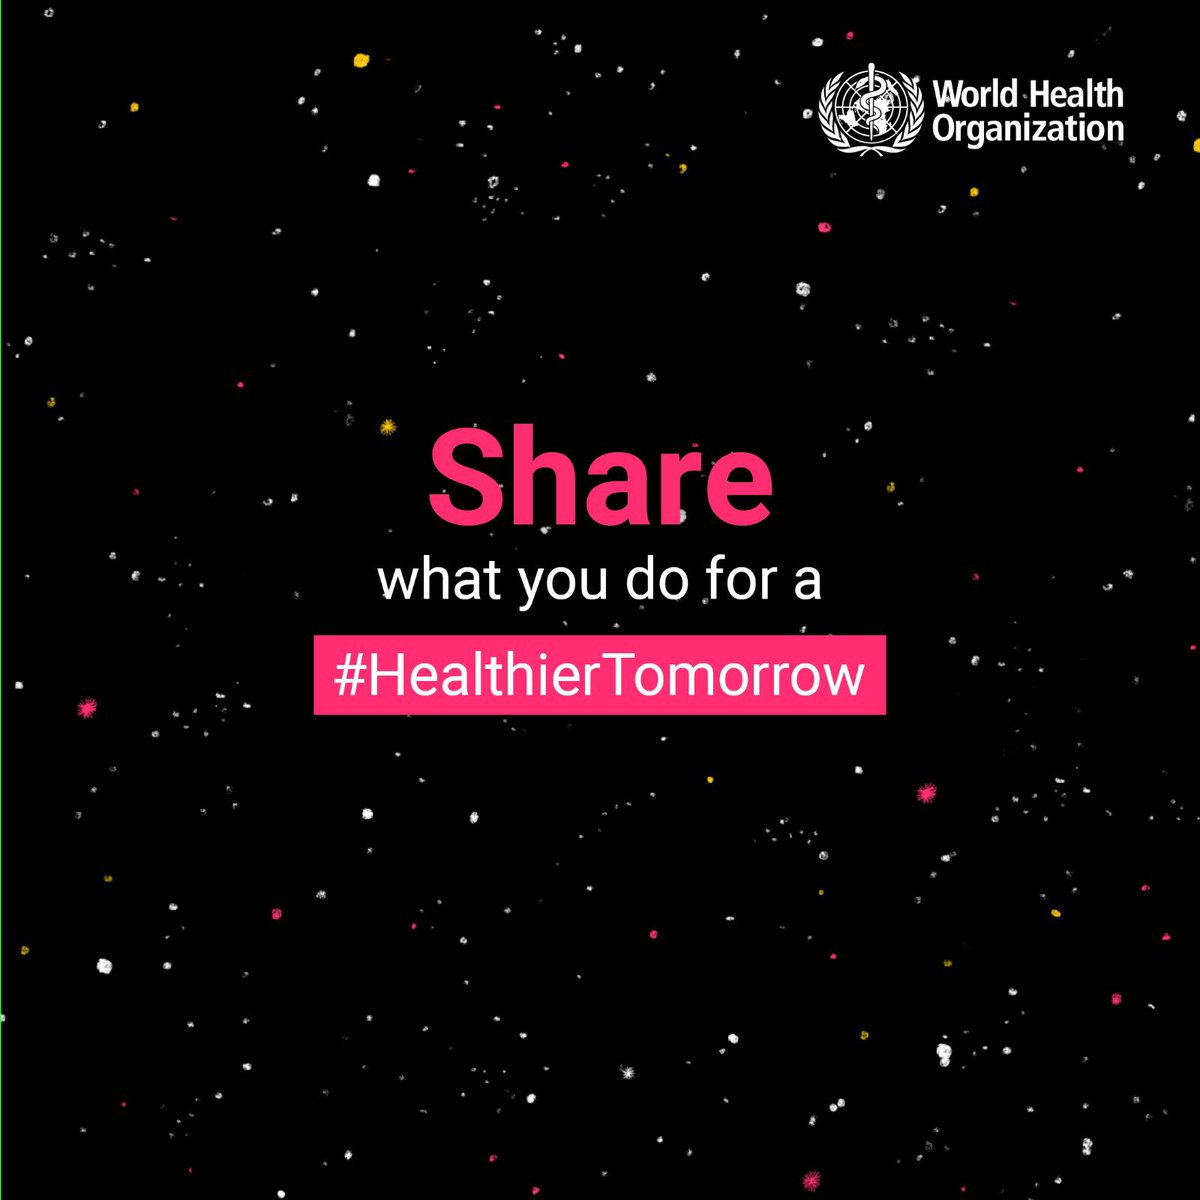 On #WorldHealthDay, we call on individuals to: -Walk/pedal to work at least 1 day a week -Turn off lights when not in the room -Avoid highly processed foods & beverages -Stop consuming tobacco -Buy less plastic The full list of #HealthierTomorrow asks: bit.ly/35MNLCQ